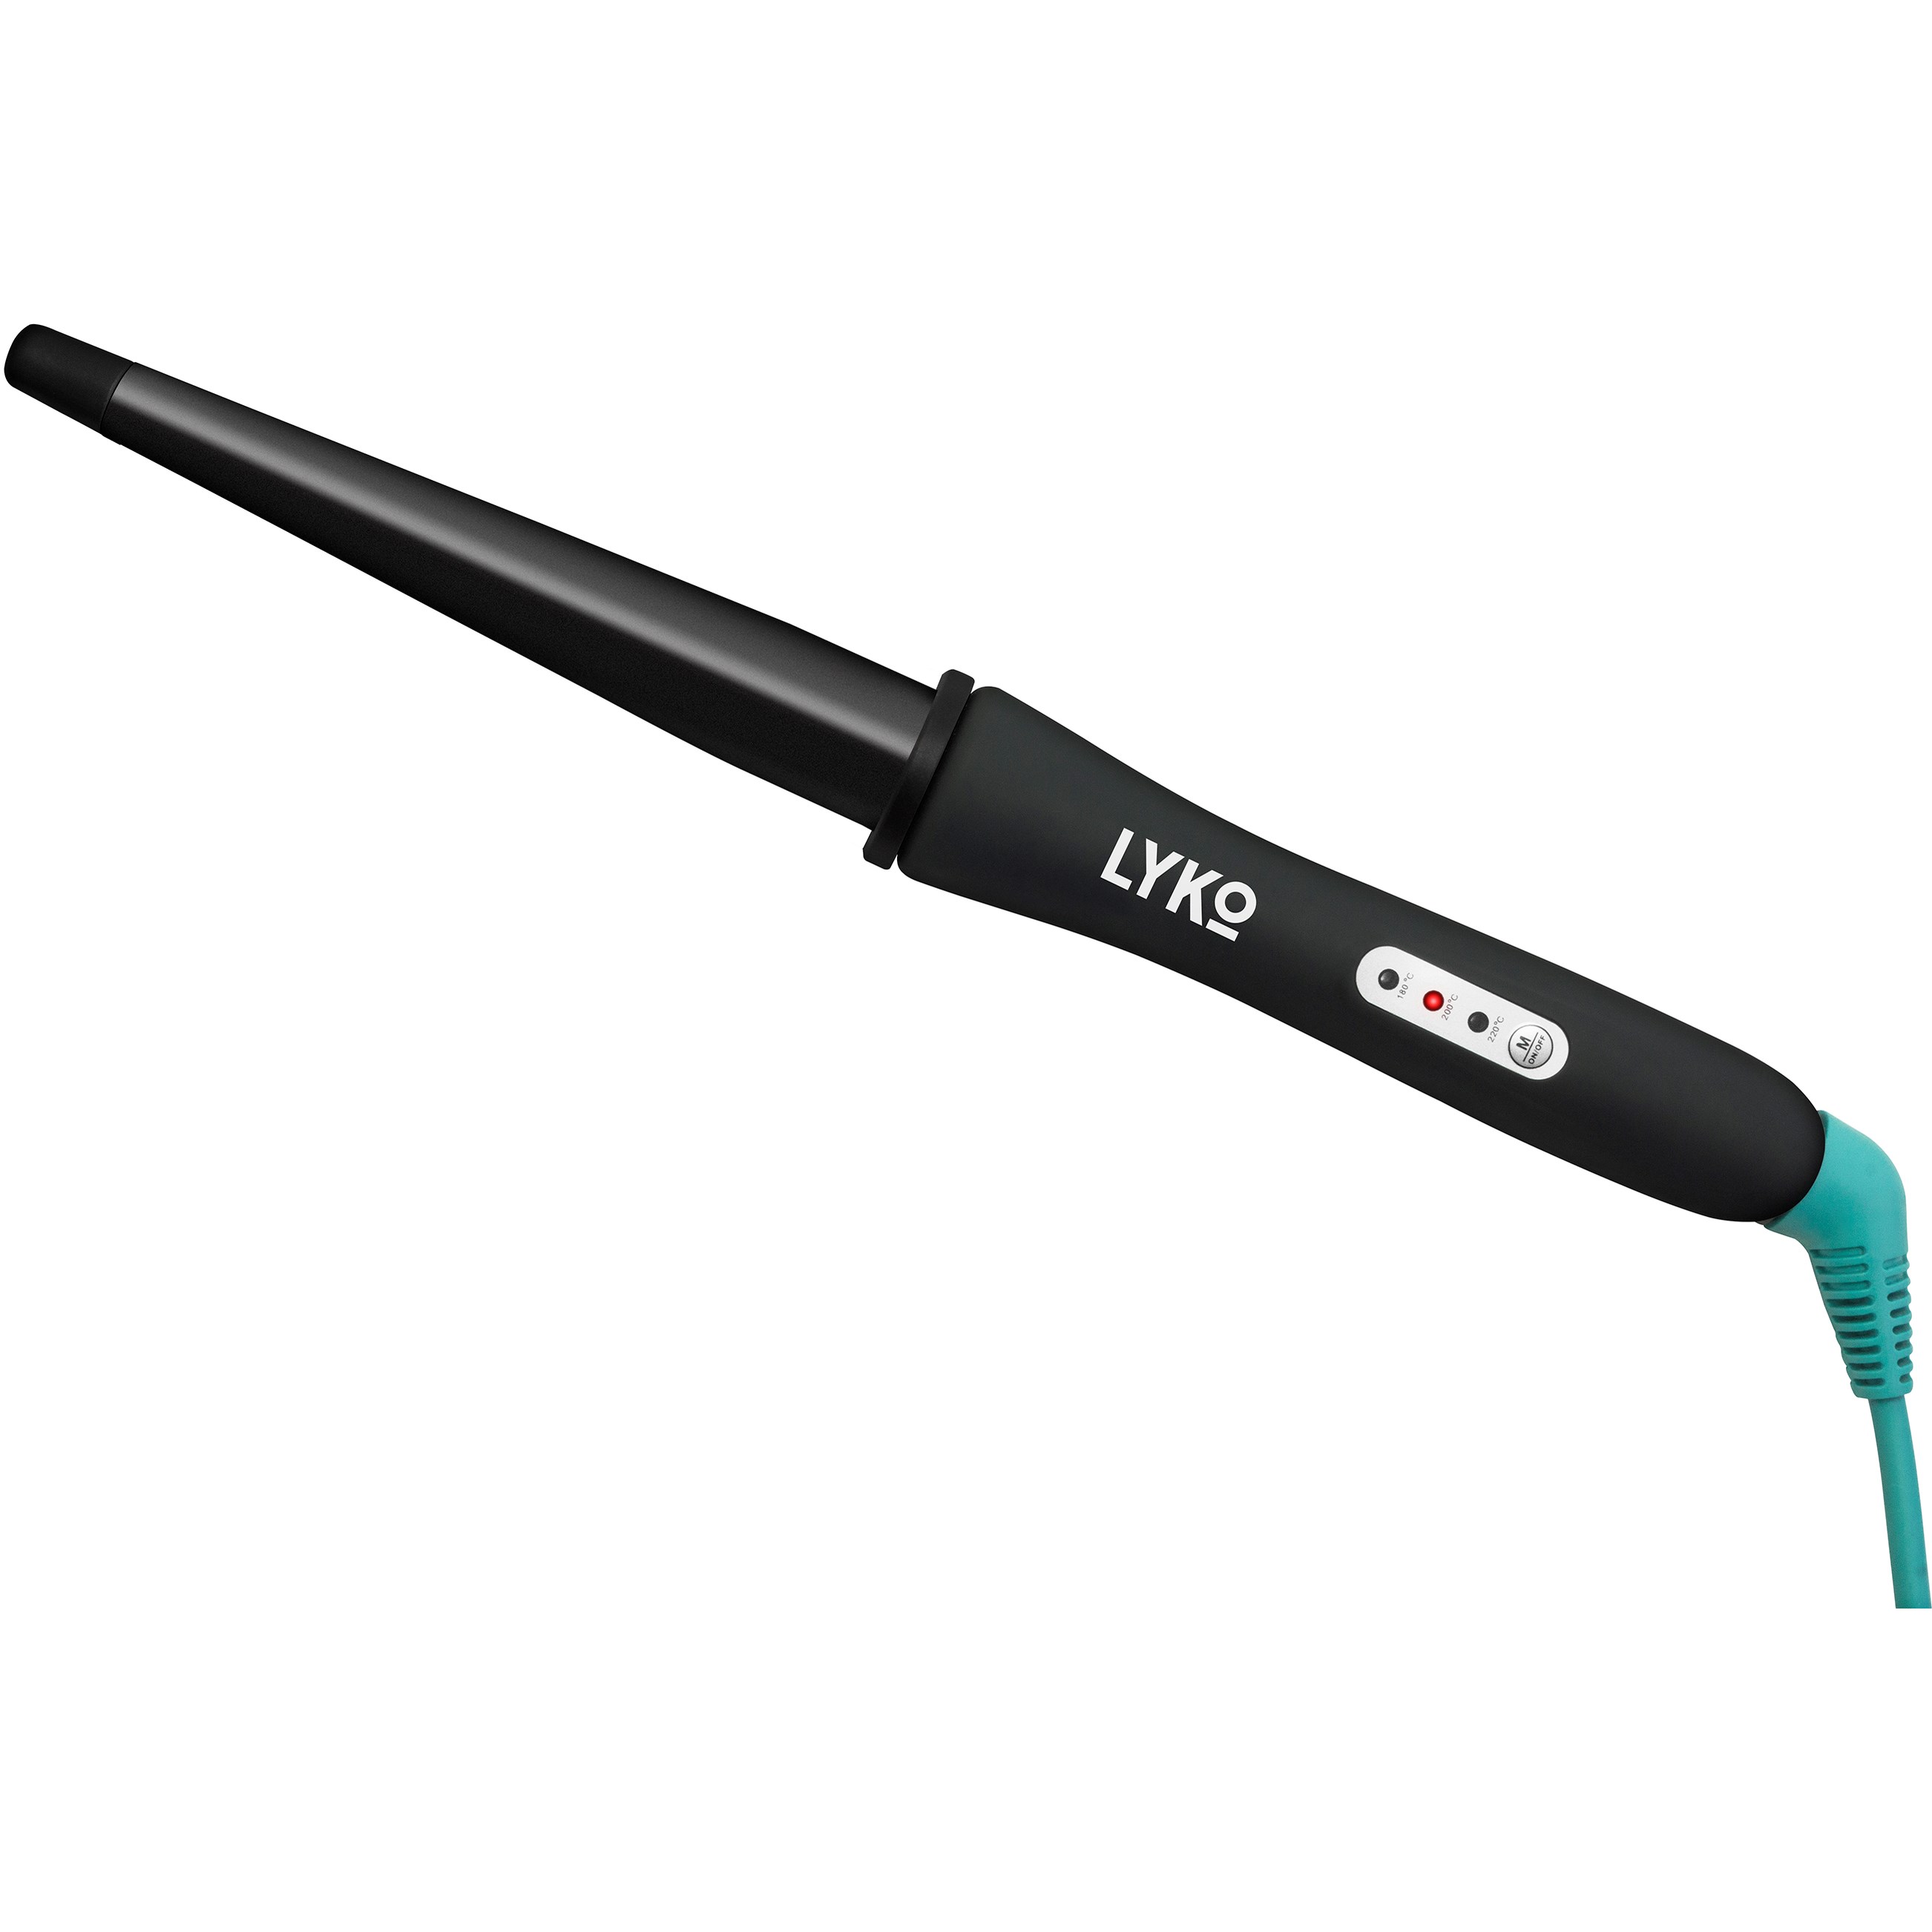 By Lyko Curling Iron 13-25 mm 13 mm